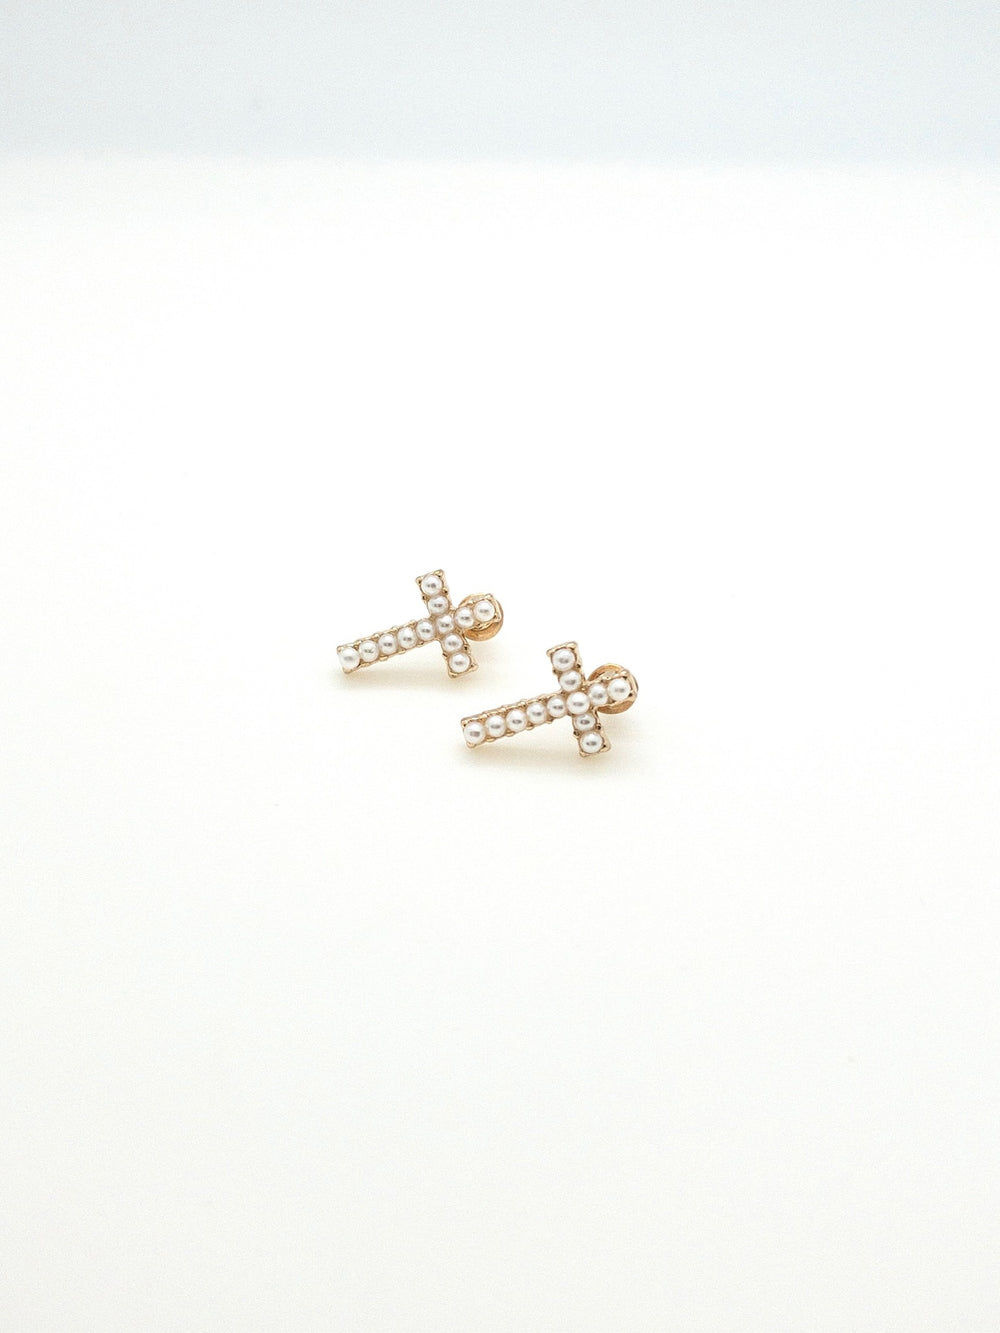 Gold with small pearl detail cross stud earrings